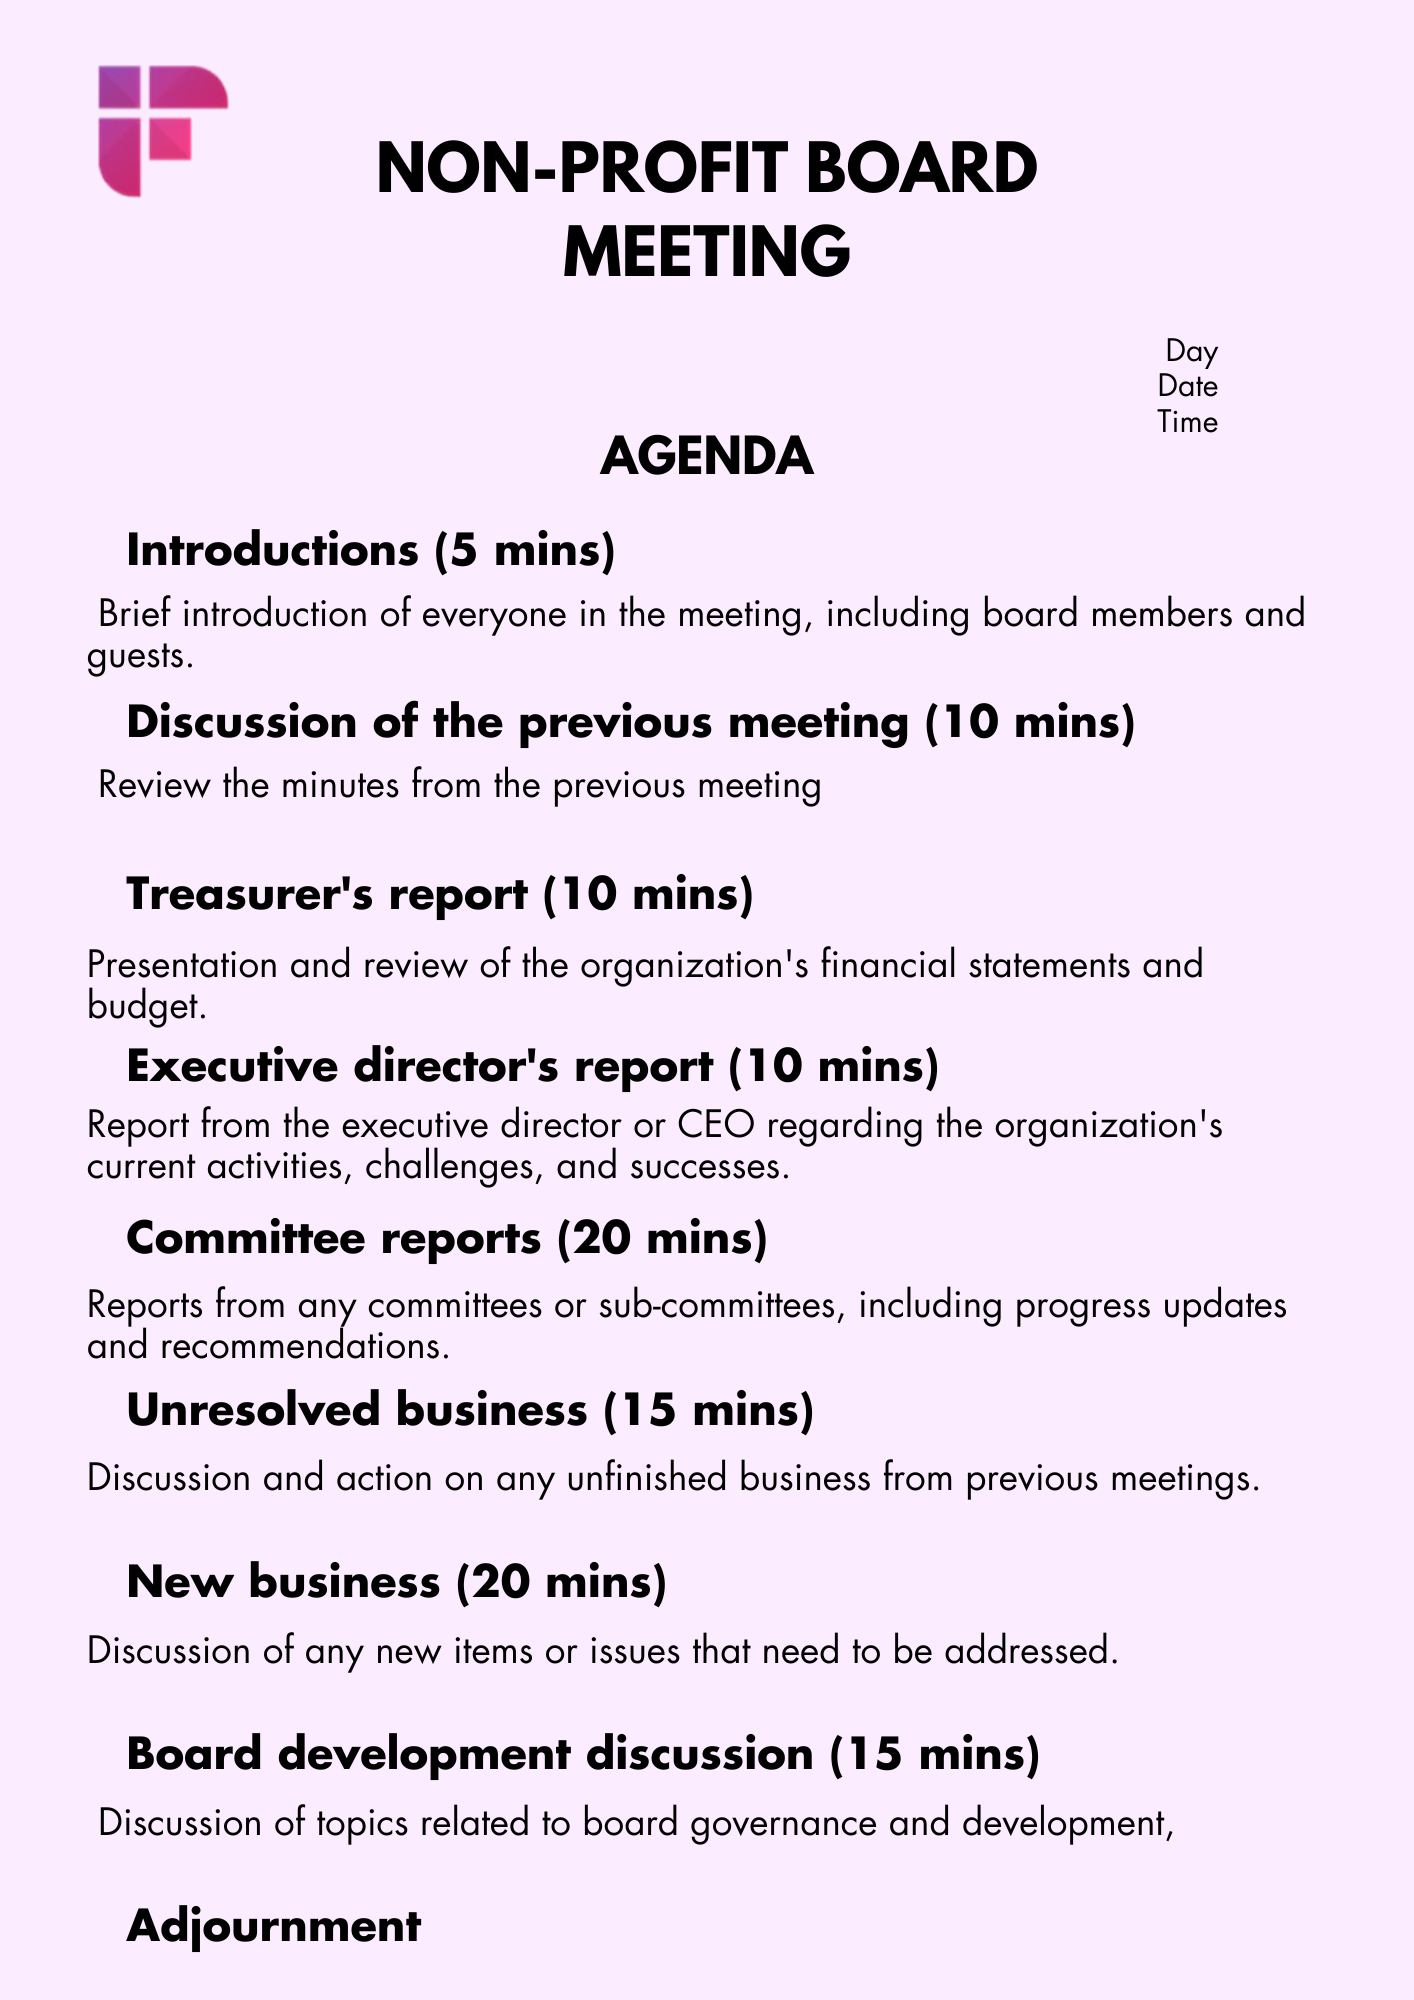 Importance of setting a meeting agenda